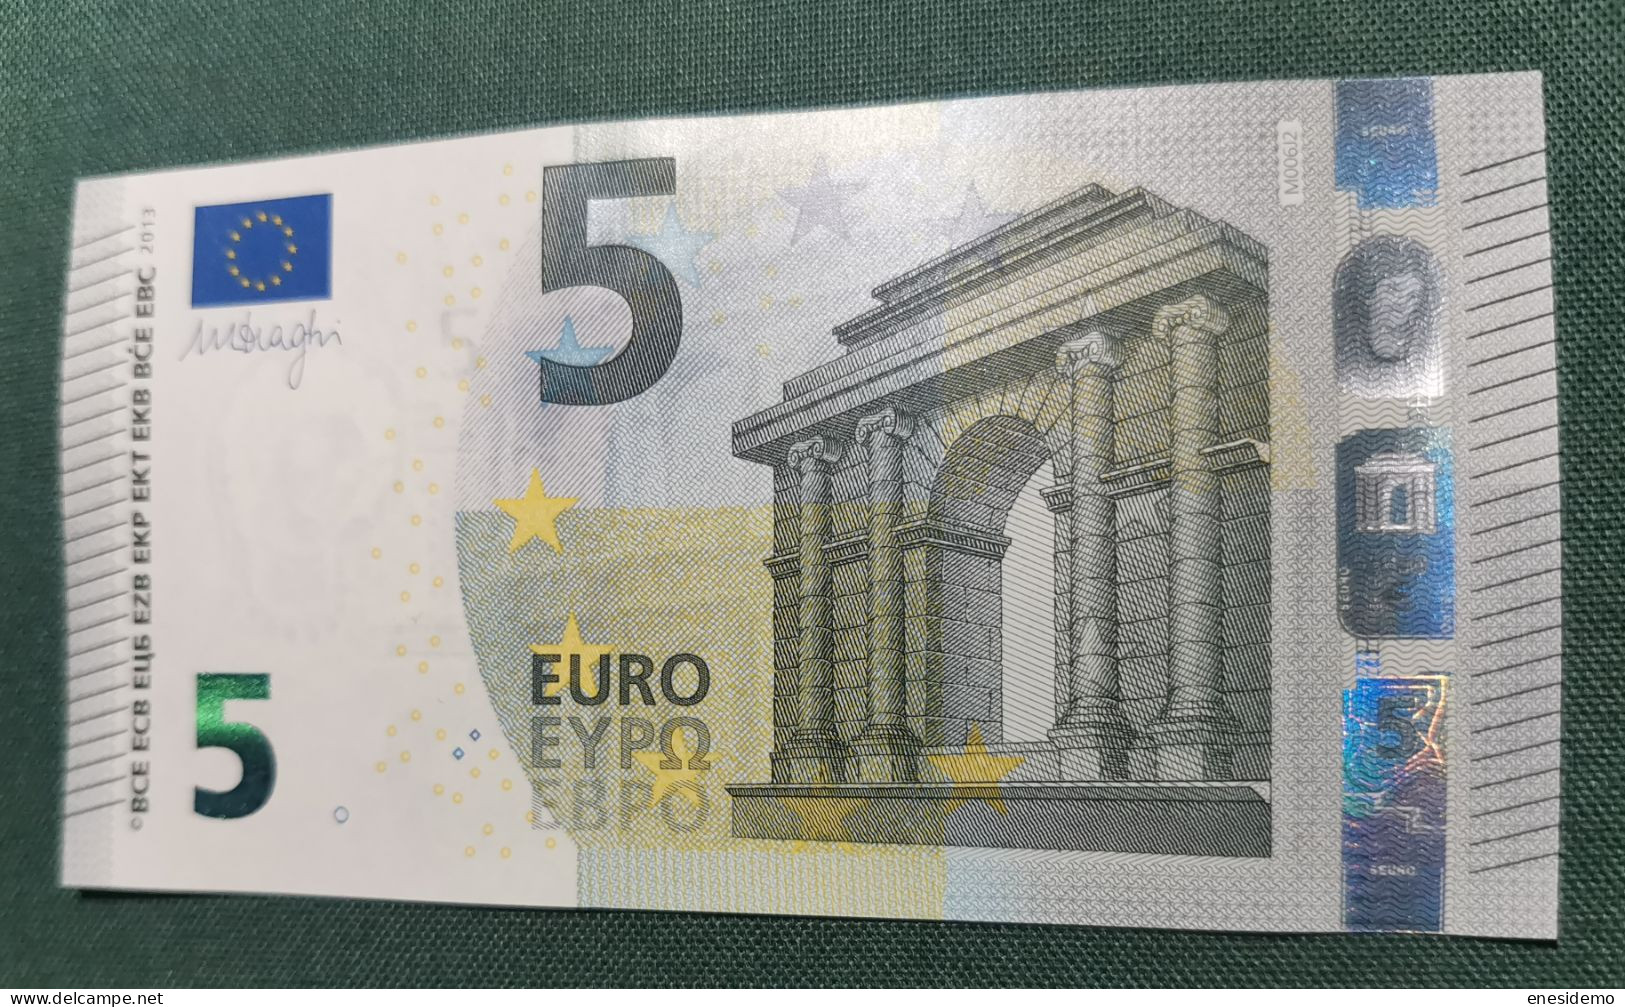 5 EURO PORTUGAL 2013 DRAGHI M006J2 MA NICE NUMBER FOUR CONSECUTIVE ZEROS SC FDS UNC. PERFECT